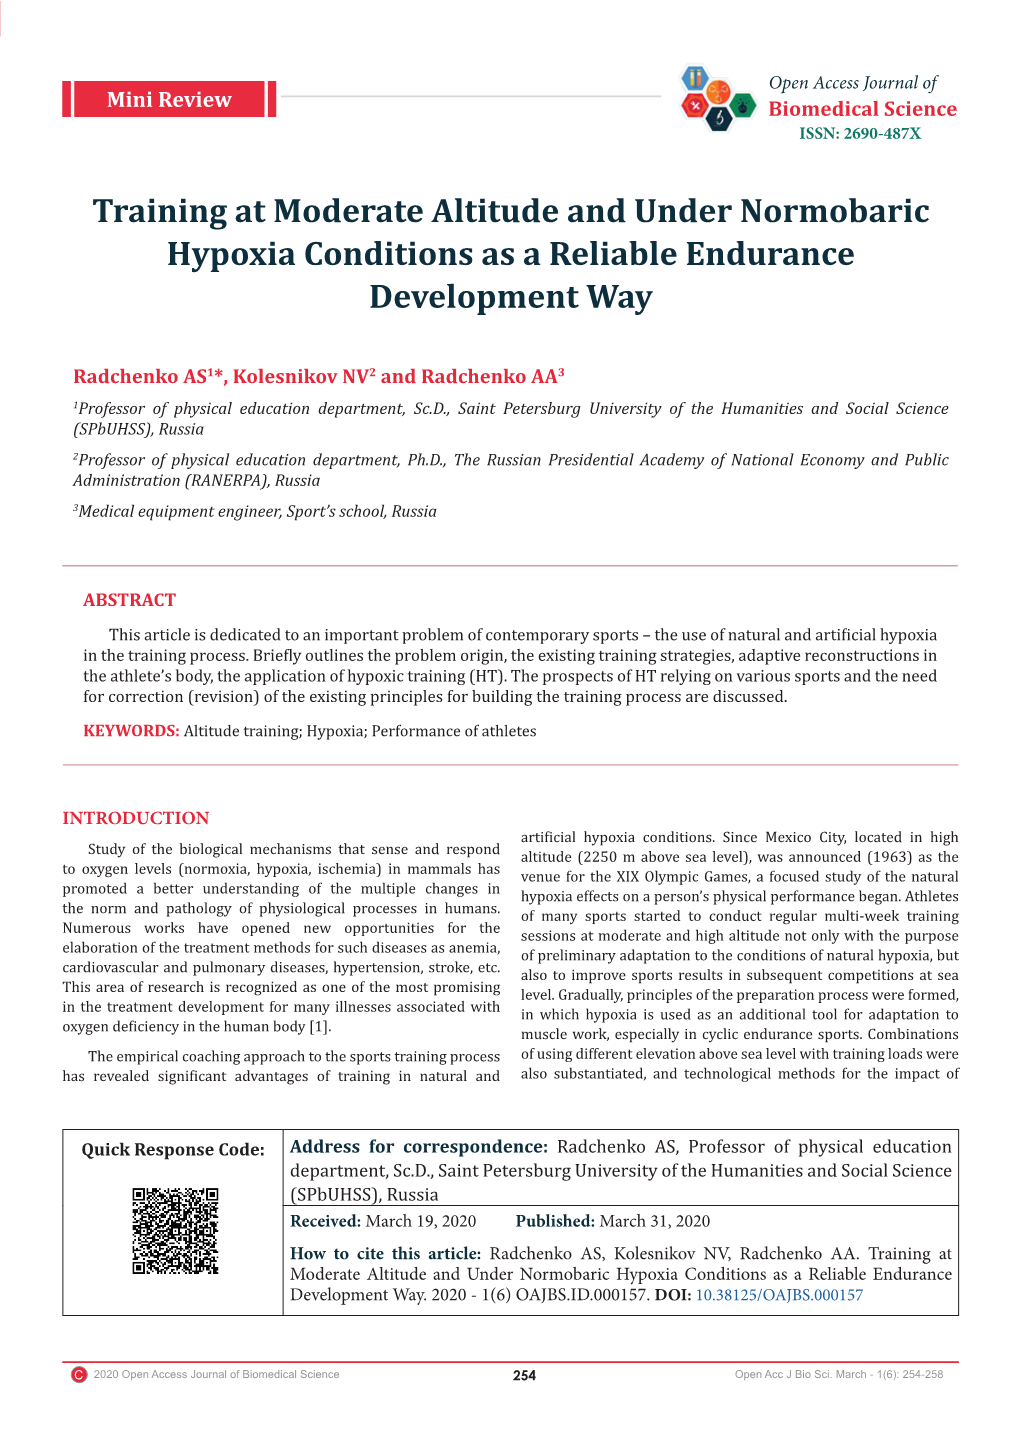 Training at Moderate Altitude and Under Normobaric Hypoxia Conditions As a Reliable Endurance Development Way